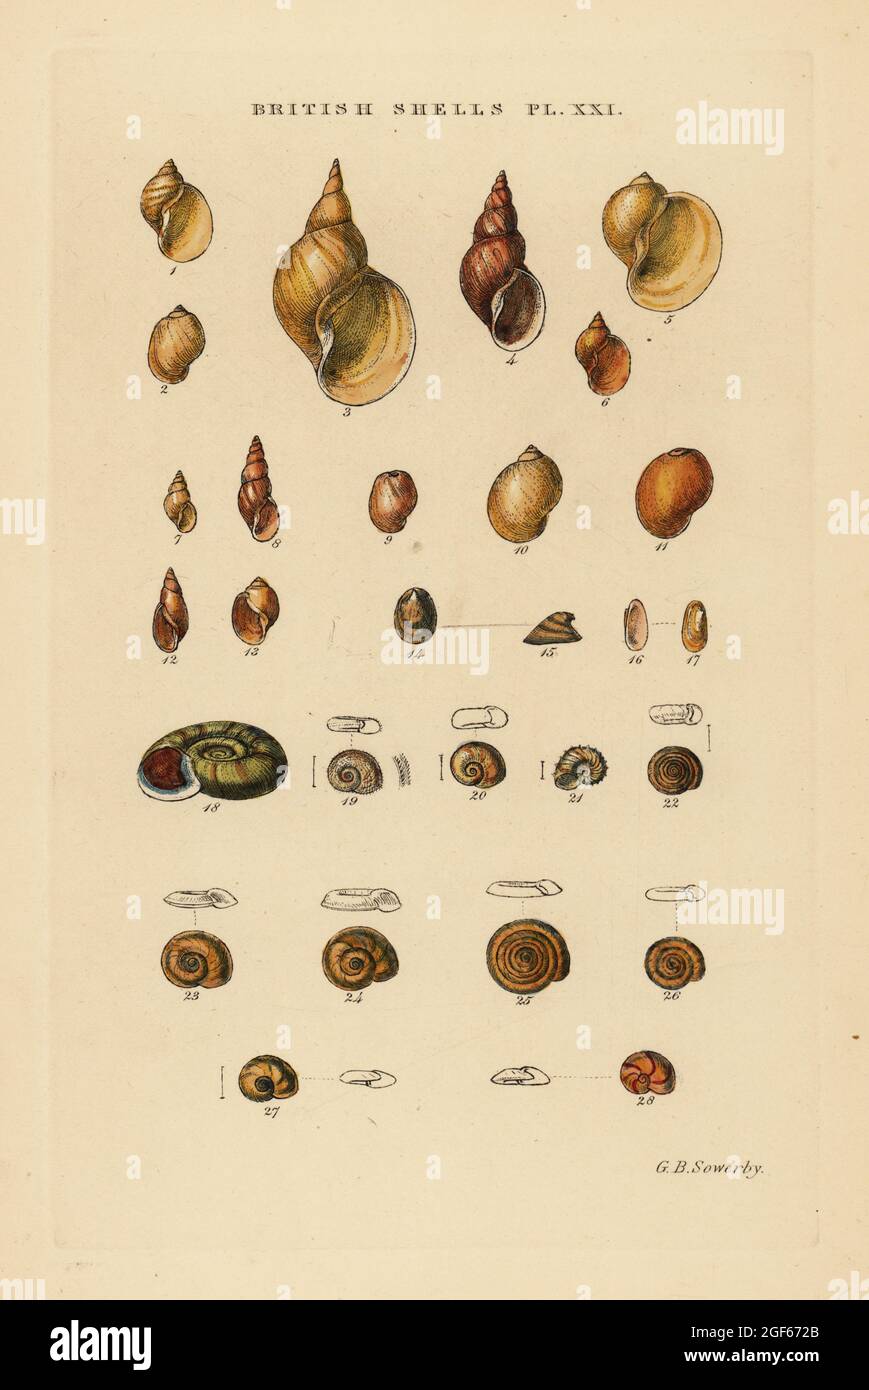 Freshwater snails, Limnæus, Physa, Ancylus, Planorbis, etc. Handcoloured copperplate engraving by George Brettingham Sowerby from his own Illustrated Index of British Shells, Sowerby and Simpkin, Marshall & Co., London, 1859. George Brettingham Sowerby II (1812-1884), British naturalist, illustrator, and conchologist. Stock Photo